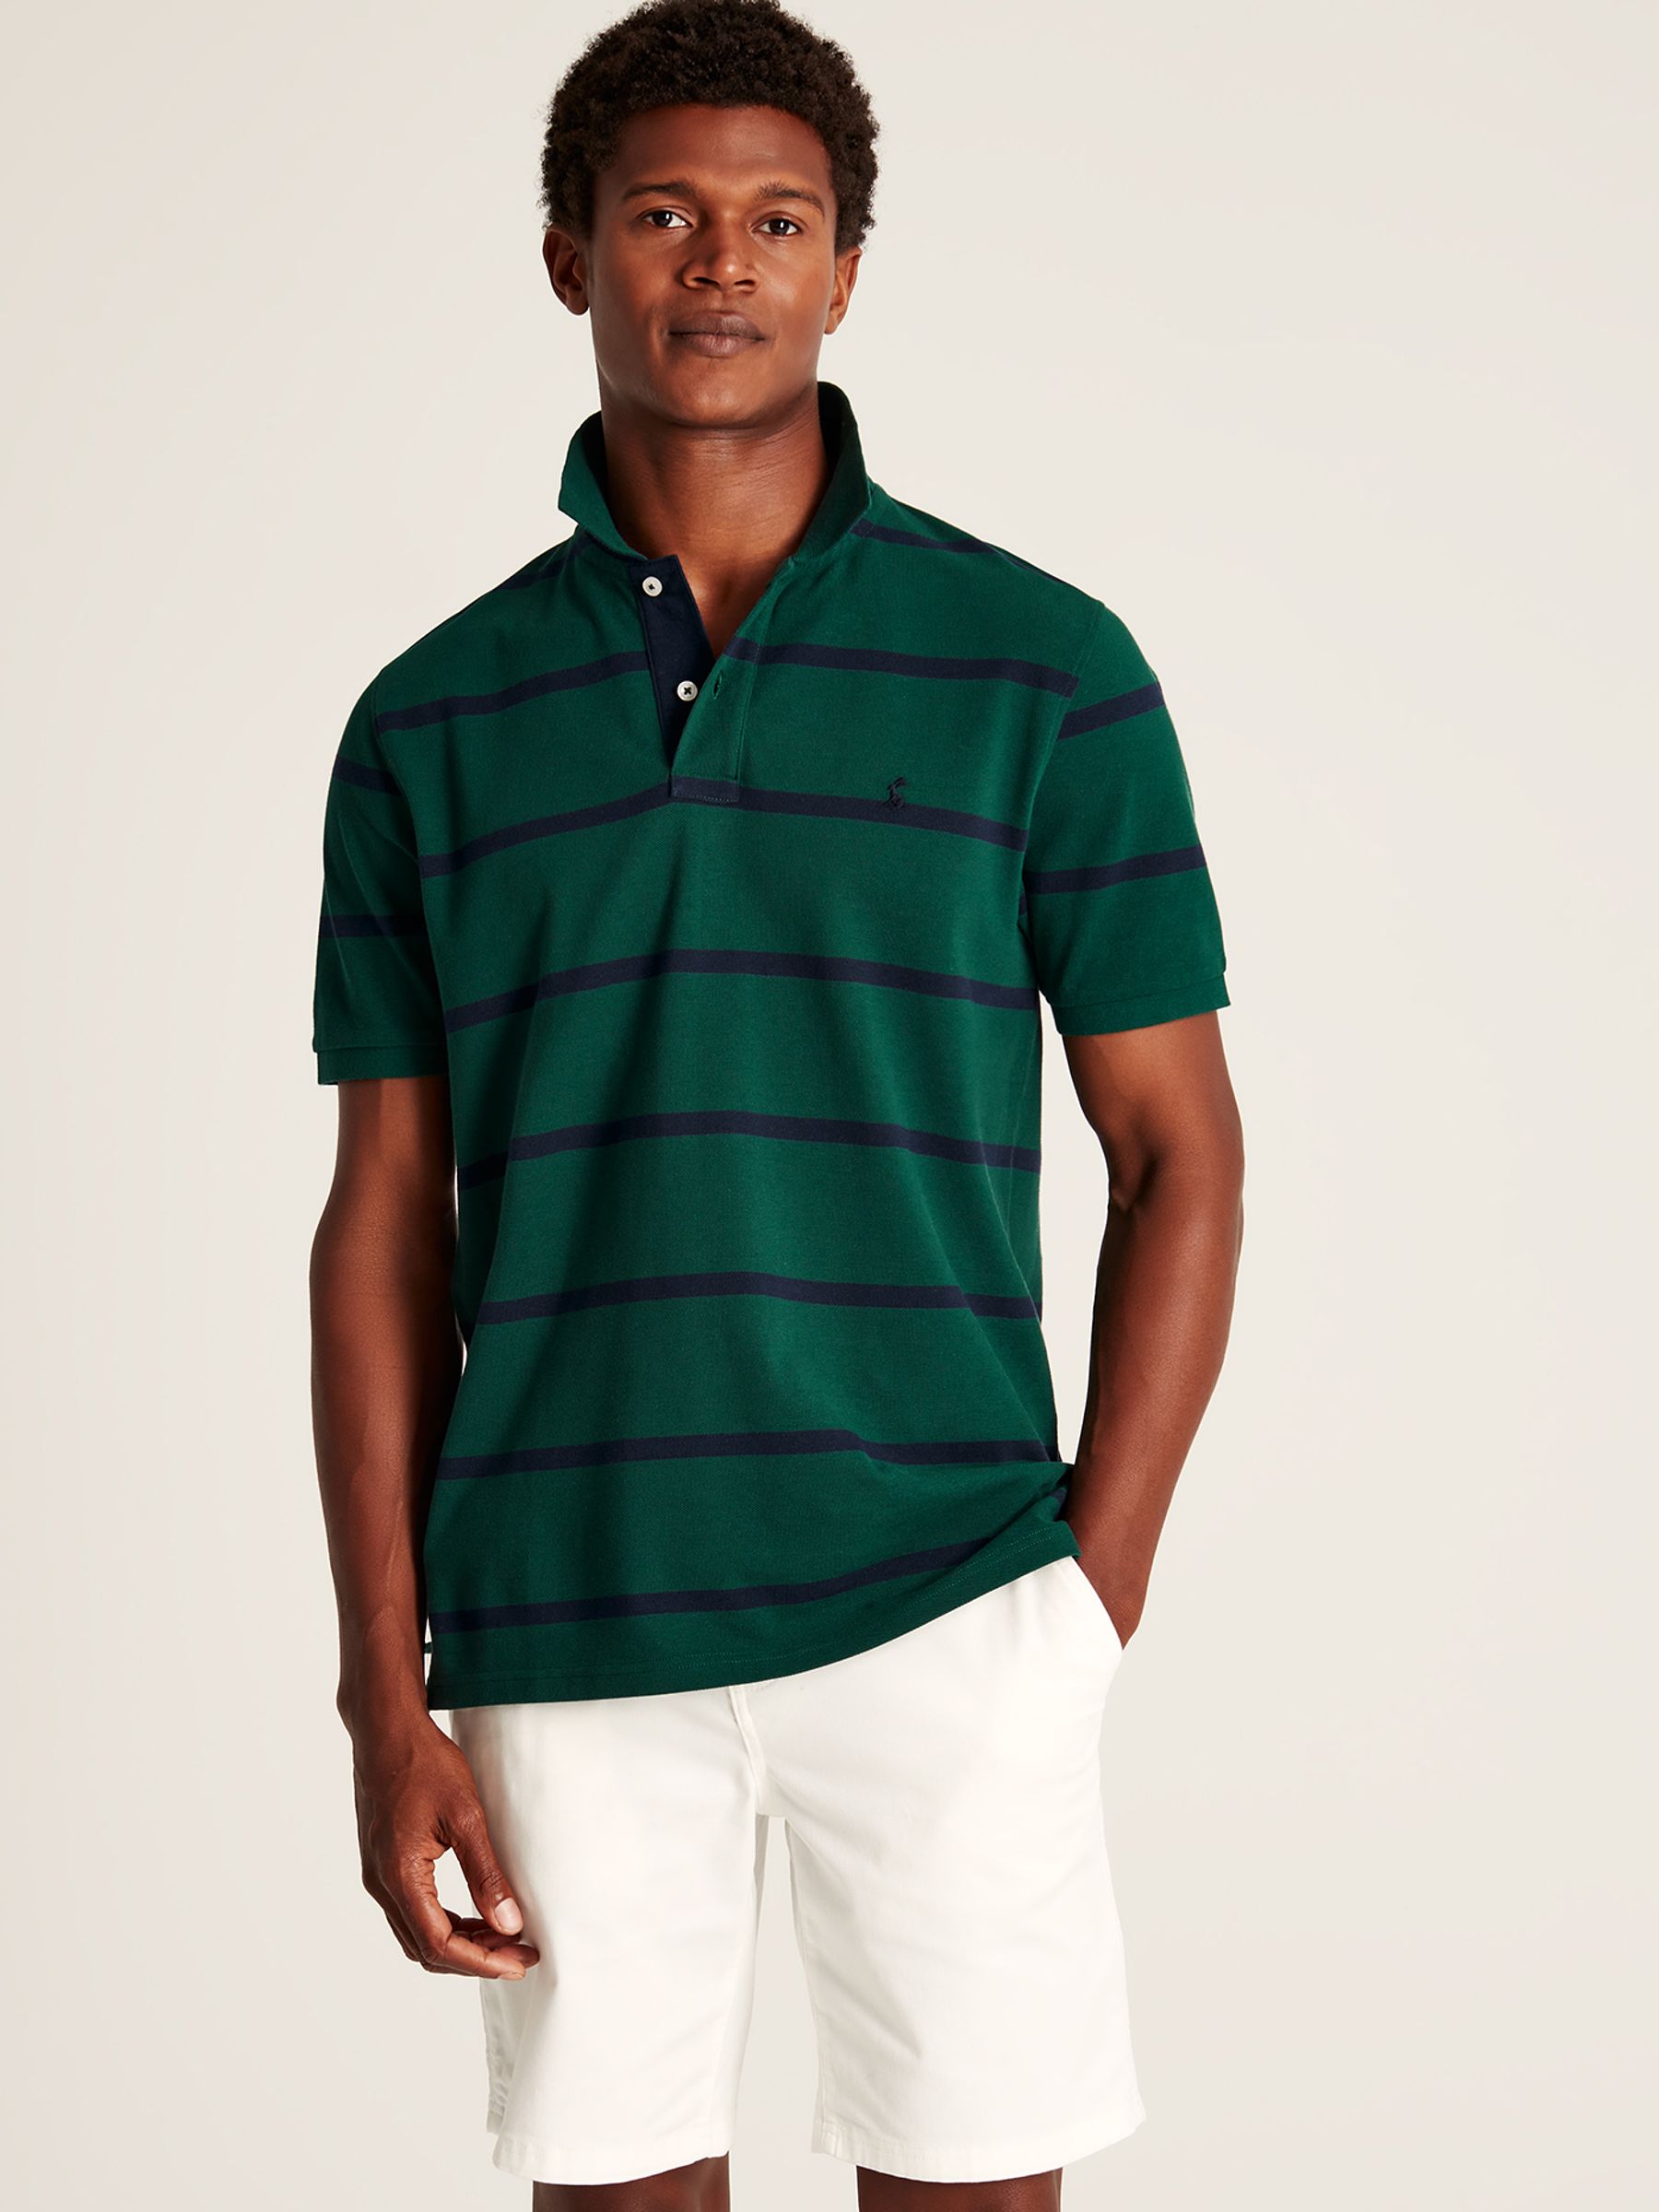 Buy Filbert Green Classic Fit Striped Polo Shirt from the Joules online ...